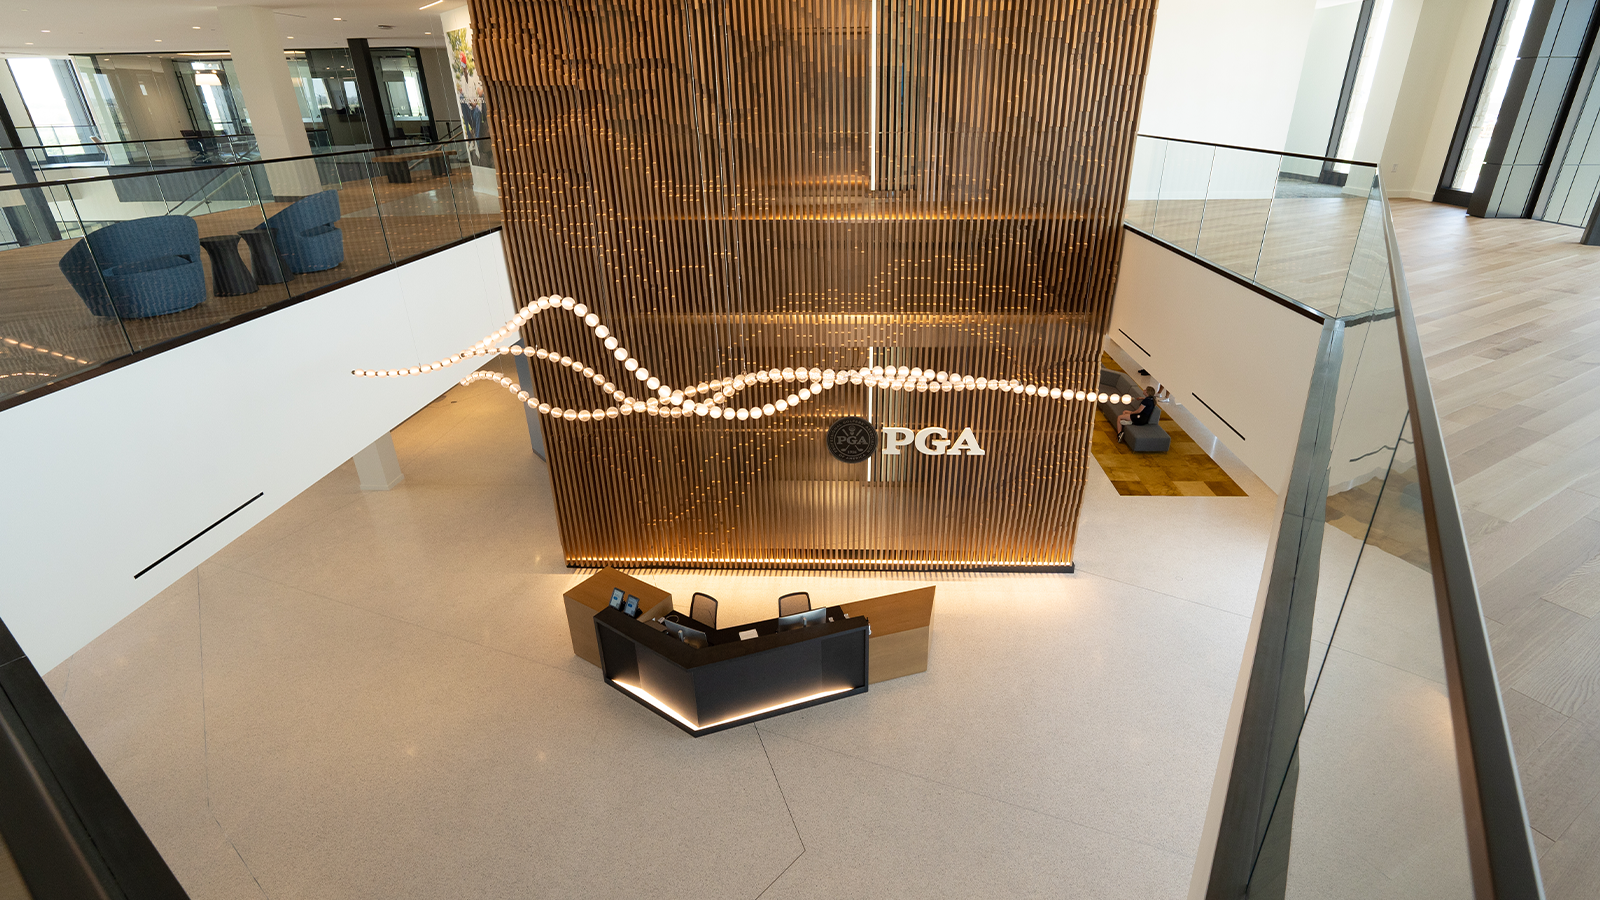 The main entrance at PGA Frisco Campus on August 17, 2022 in Frisco, Texas. (Photo by The Mamones LLC/PGA of America)